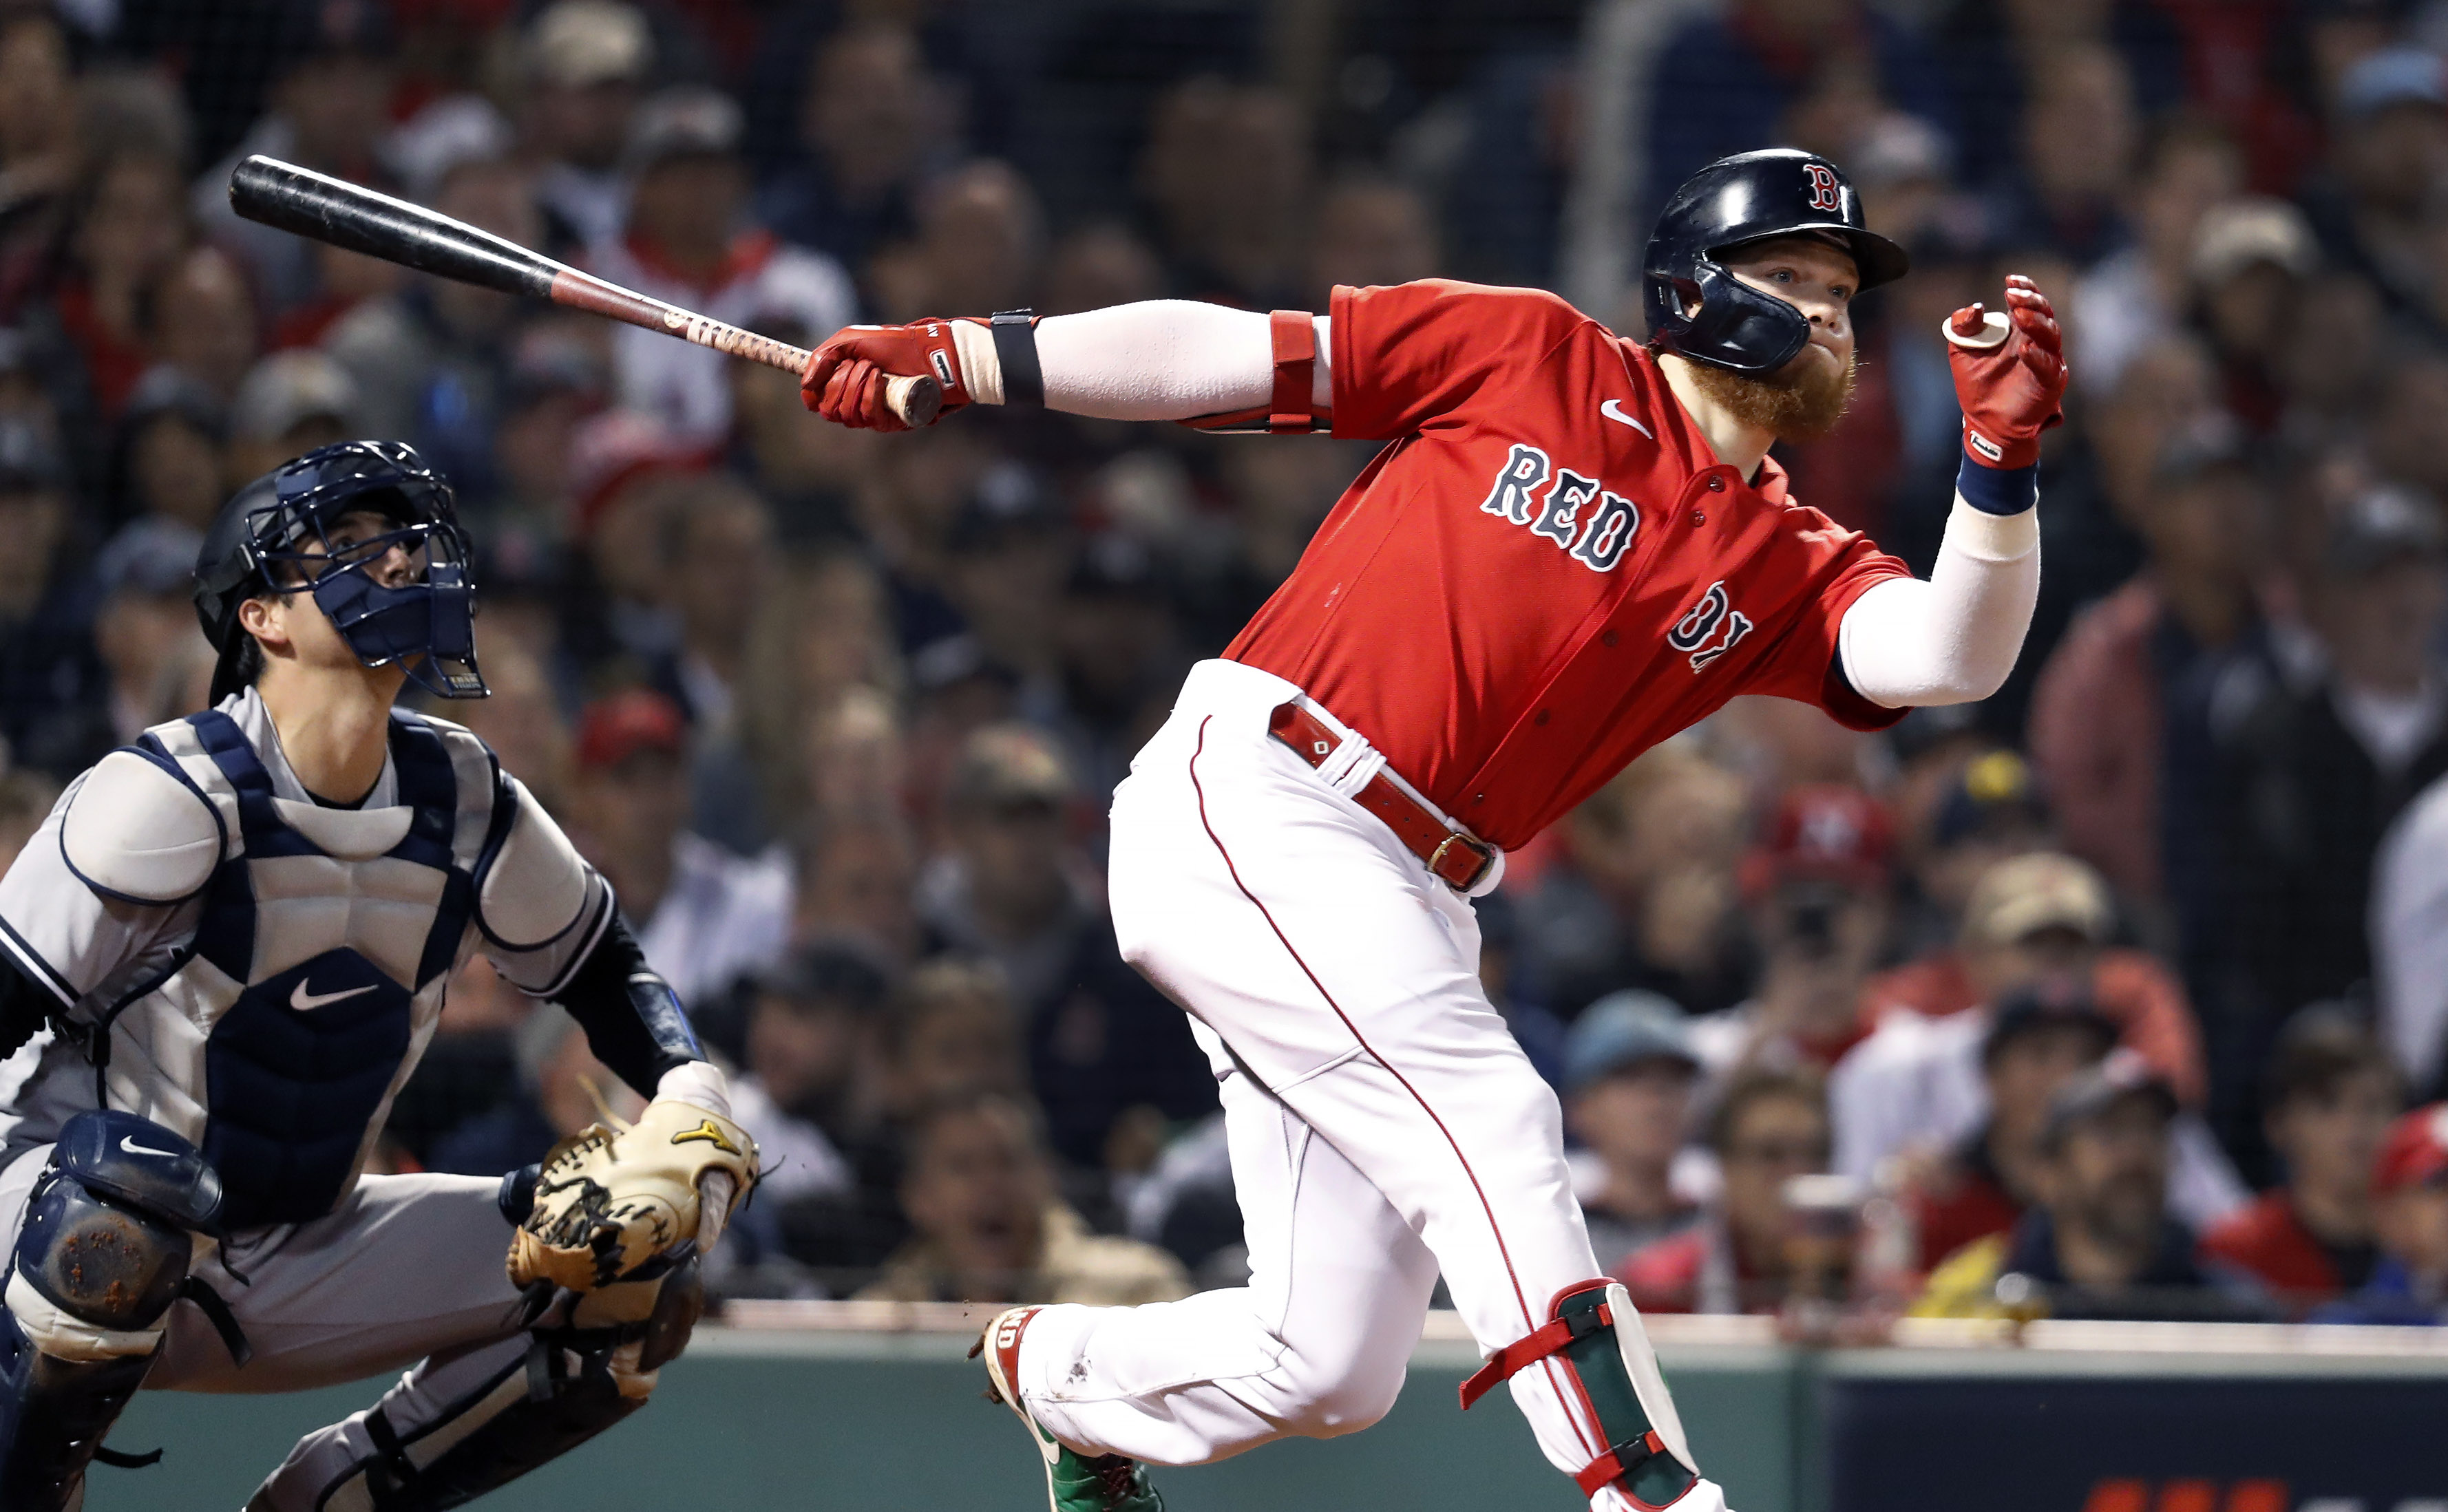 Red Sox Rebuild Jettisoned Entire 2018 World Series Outfield - The